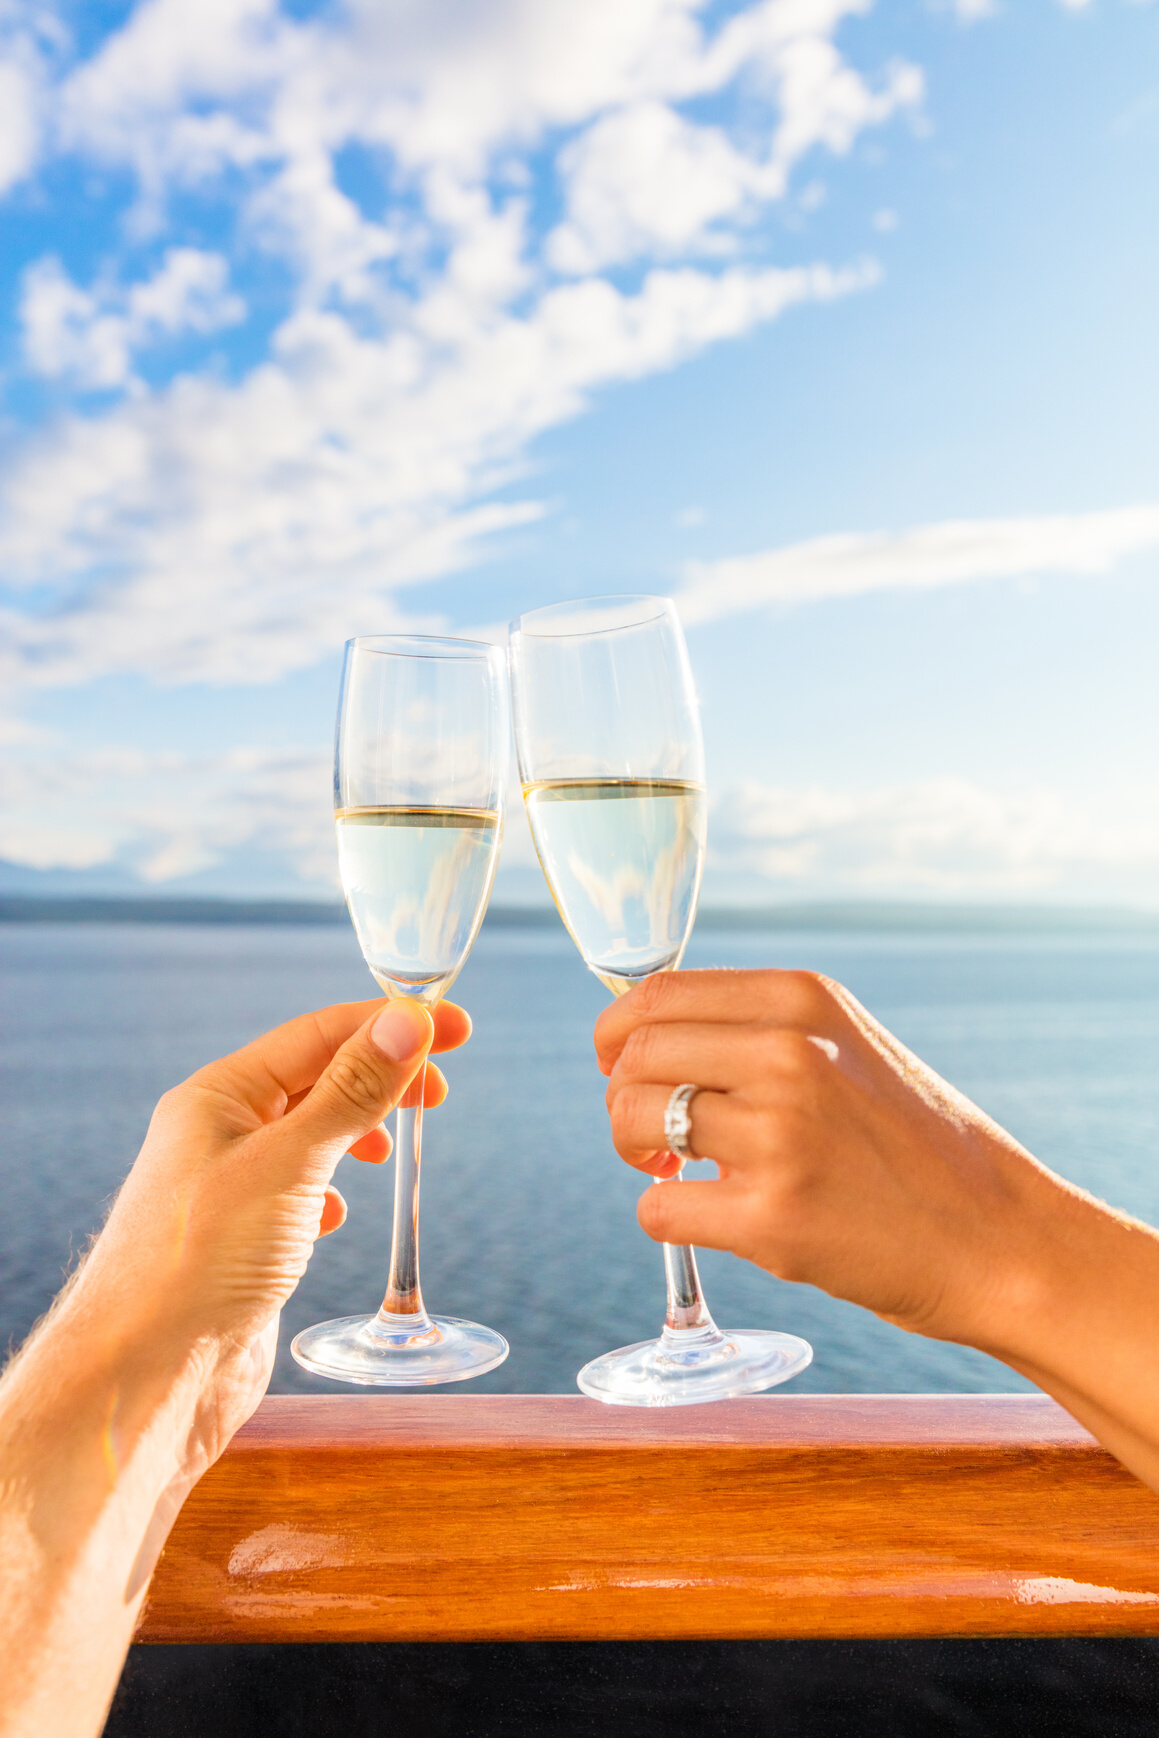 Luxury Honeymoon Cruise Couple Toasting Champagne. Travel Holiday Newlyweds Drinking with Wedding Rings Holding Glasses Doing Cheers at Sunset View of Cruise Holiday Destination